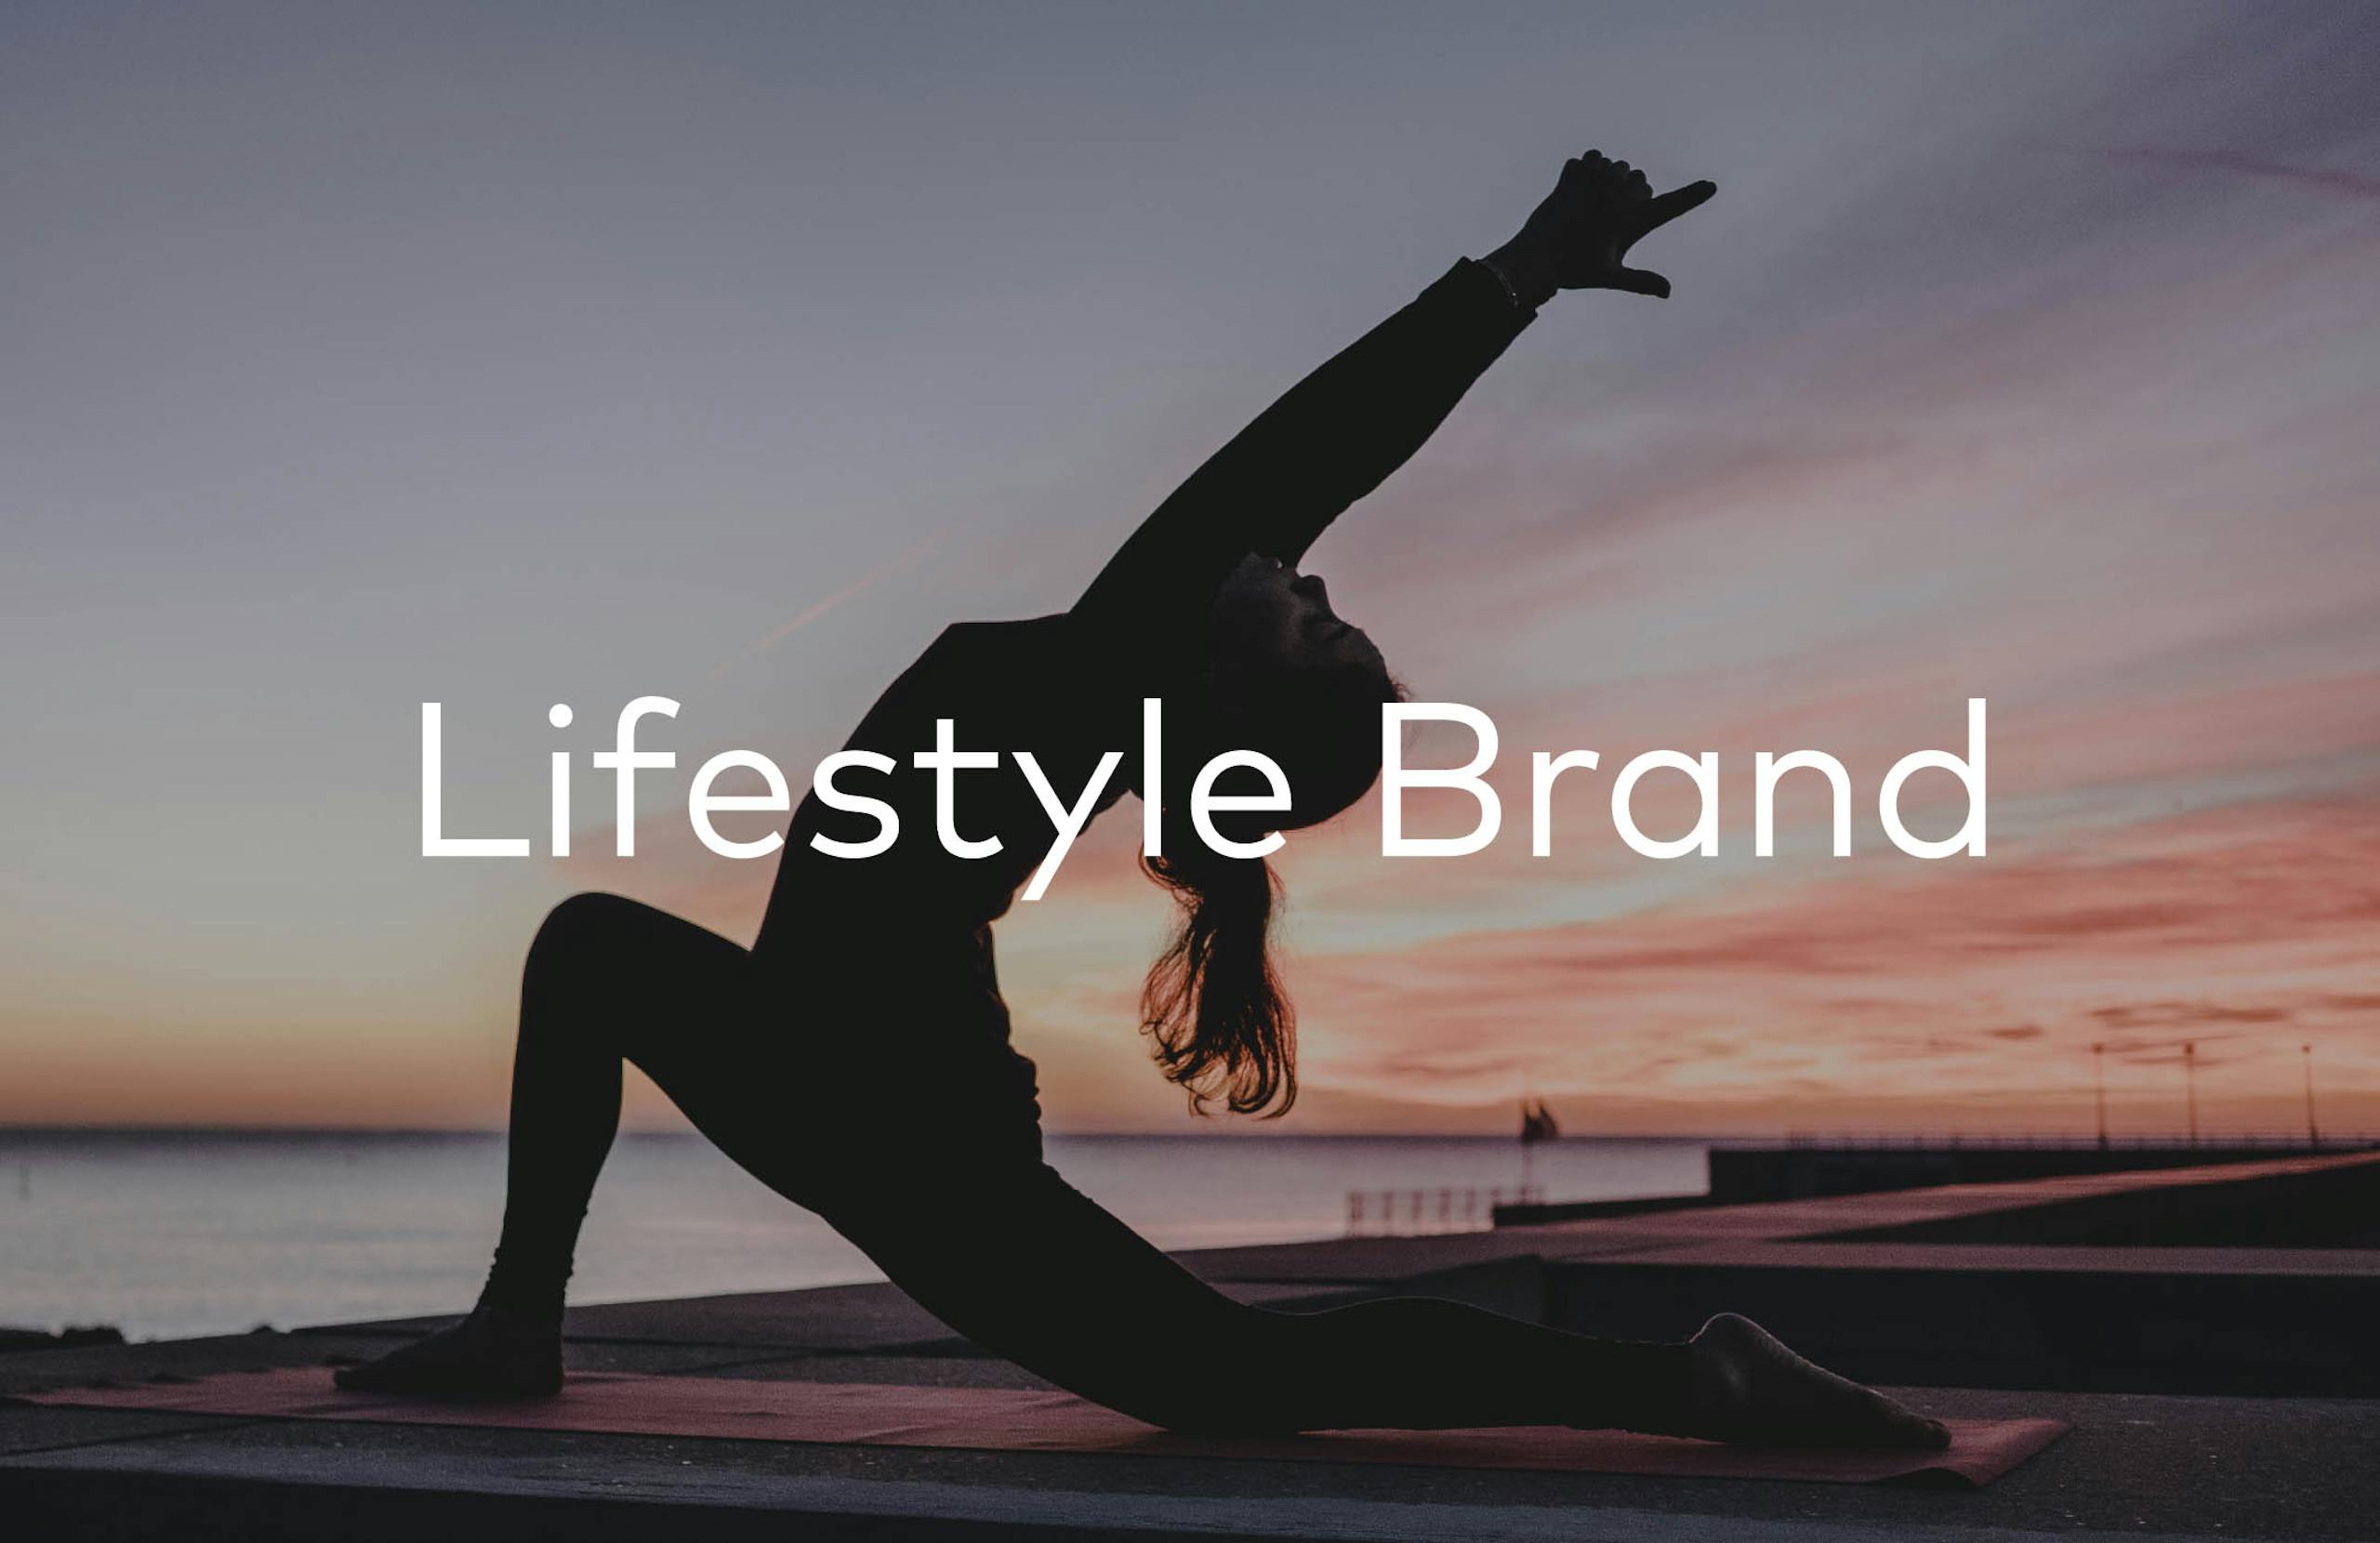 Woman doing yoga with text "Lifestyle Brand"